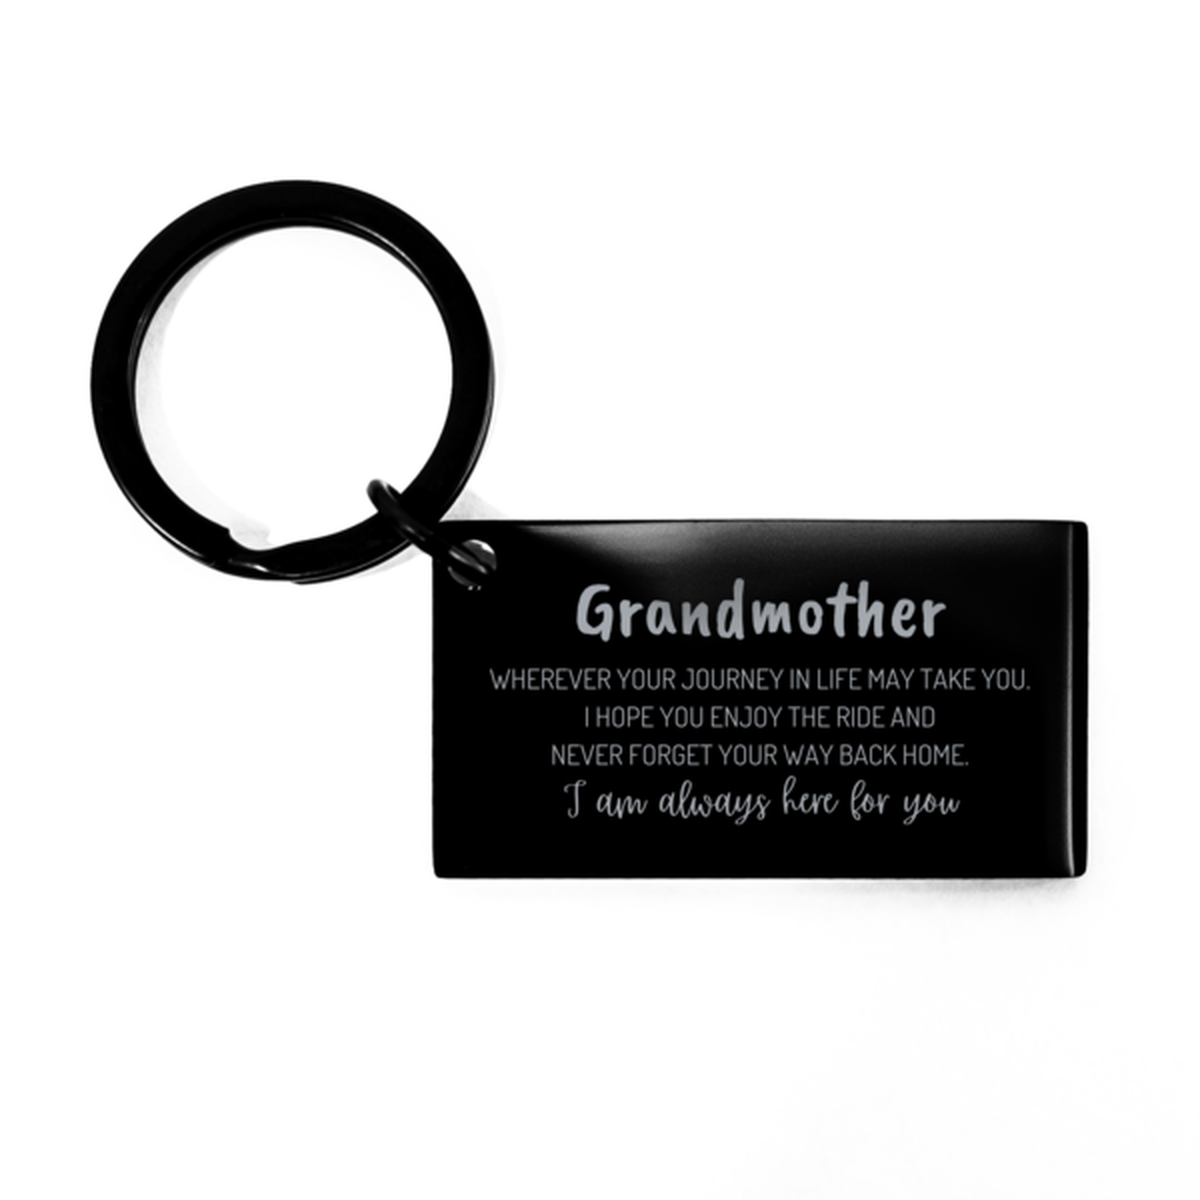 Grandmother wherever your journey in life may take you, I am always here for you Grandmother Keychain, Awesome Christmas Gifts For Grandmother, Grandmother Birthday Gifts for Men Women Family Loved One